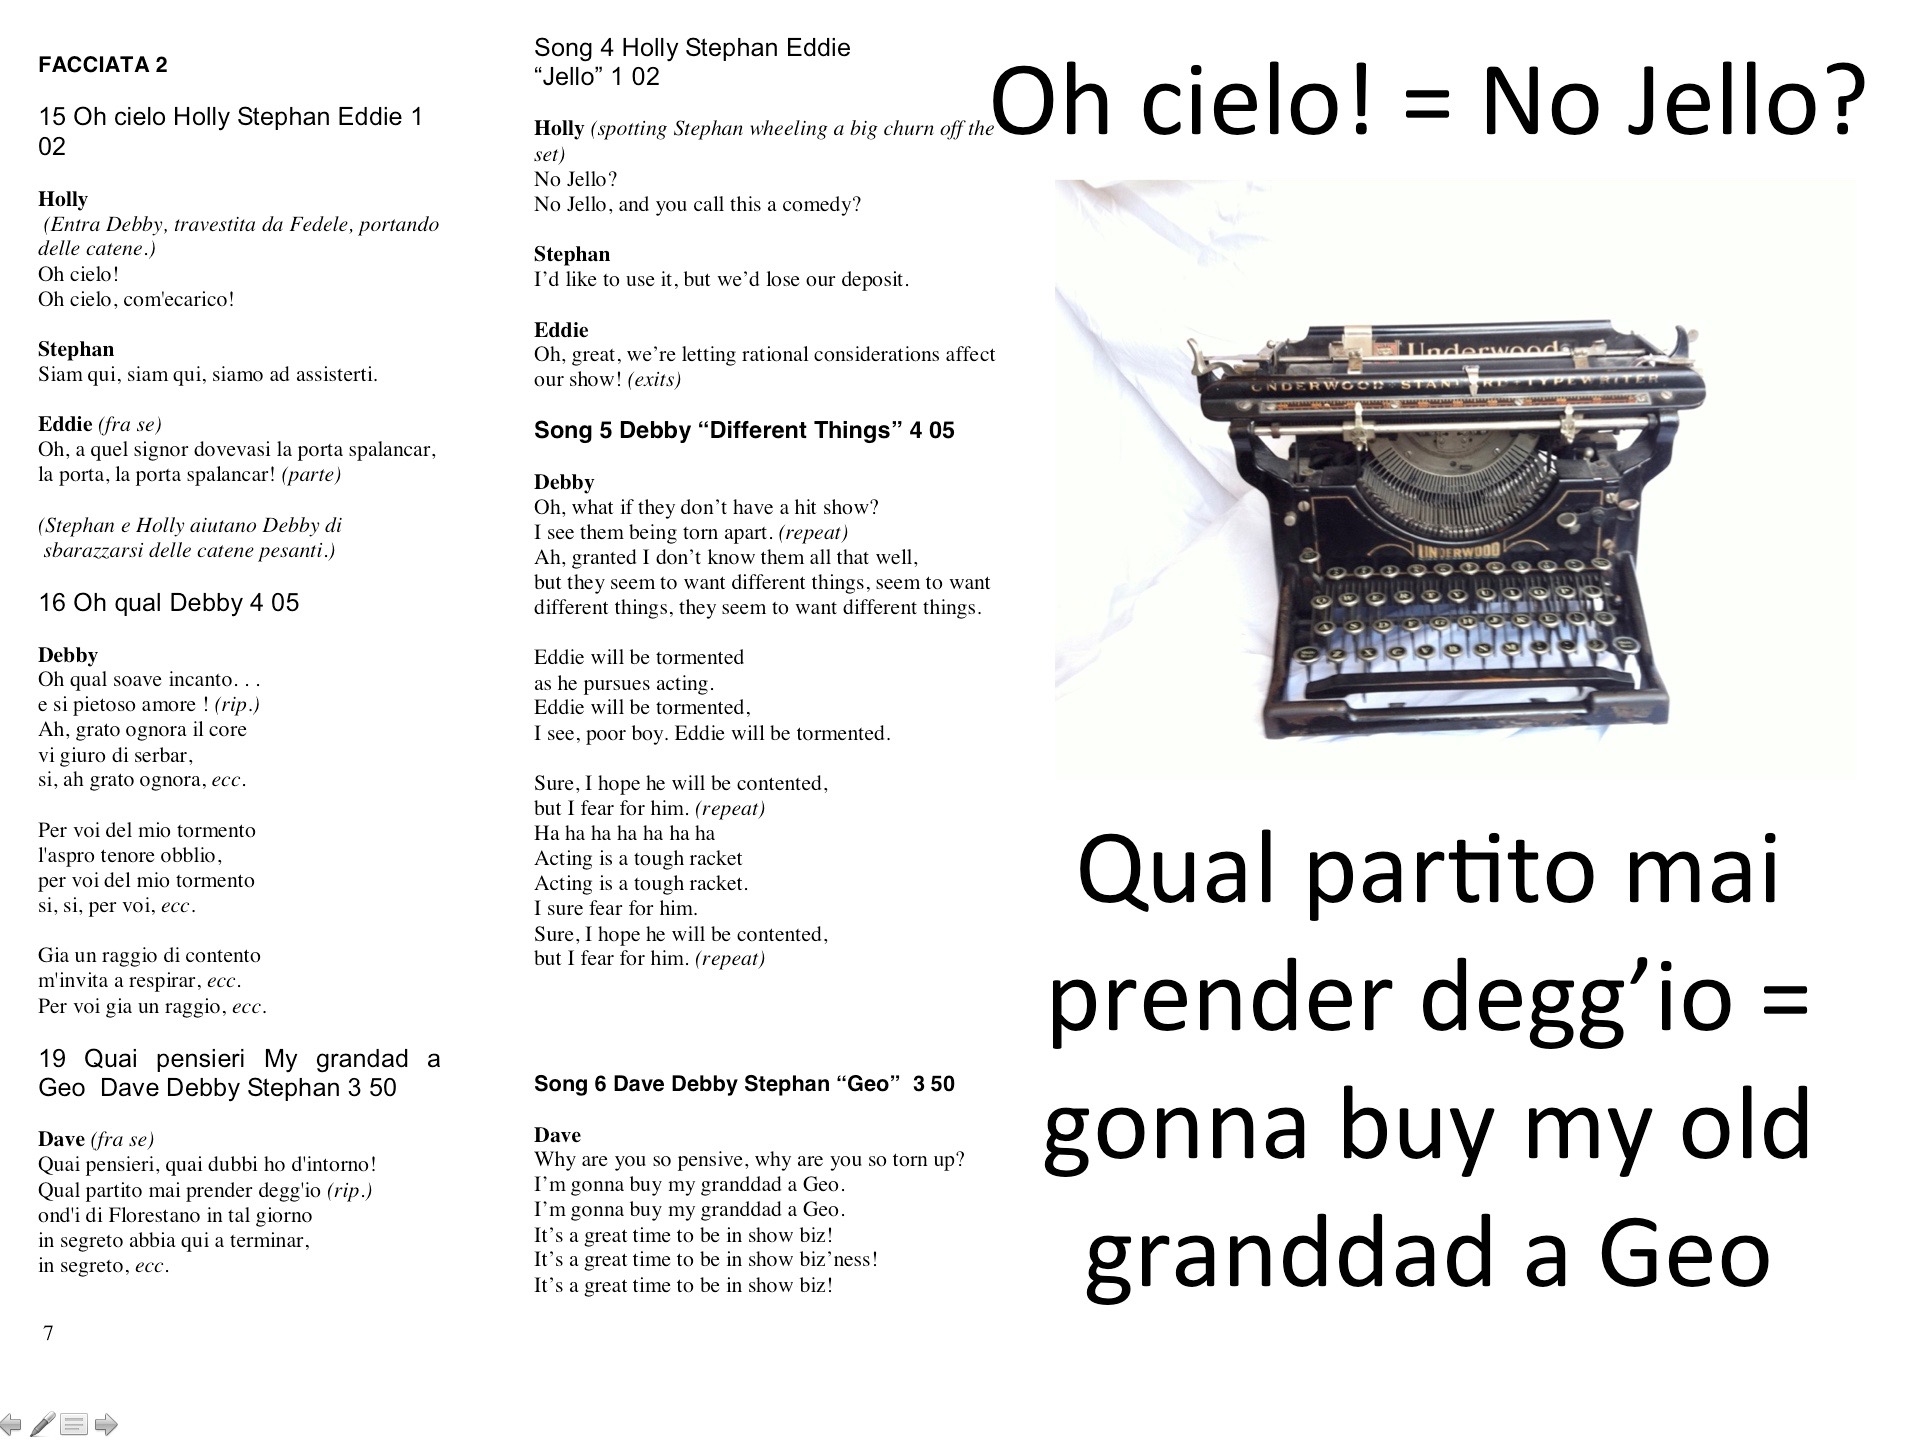 Photo showing the Italian lyrics from Leonora on the left and the English lyrics that replaced them in A Roadkill Opera on the right. Also shown is a photo of a 1912 Underwood Standard manual typewriter.